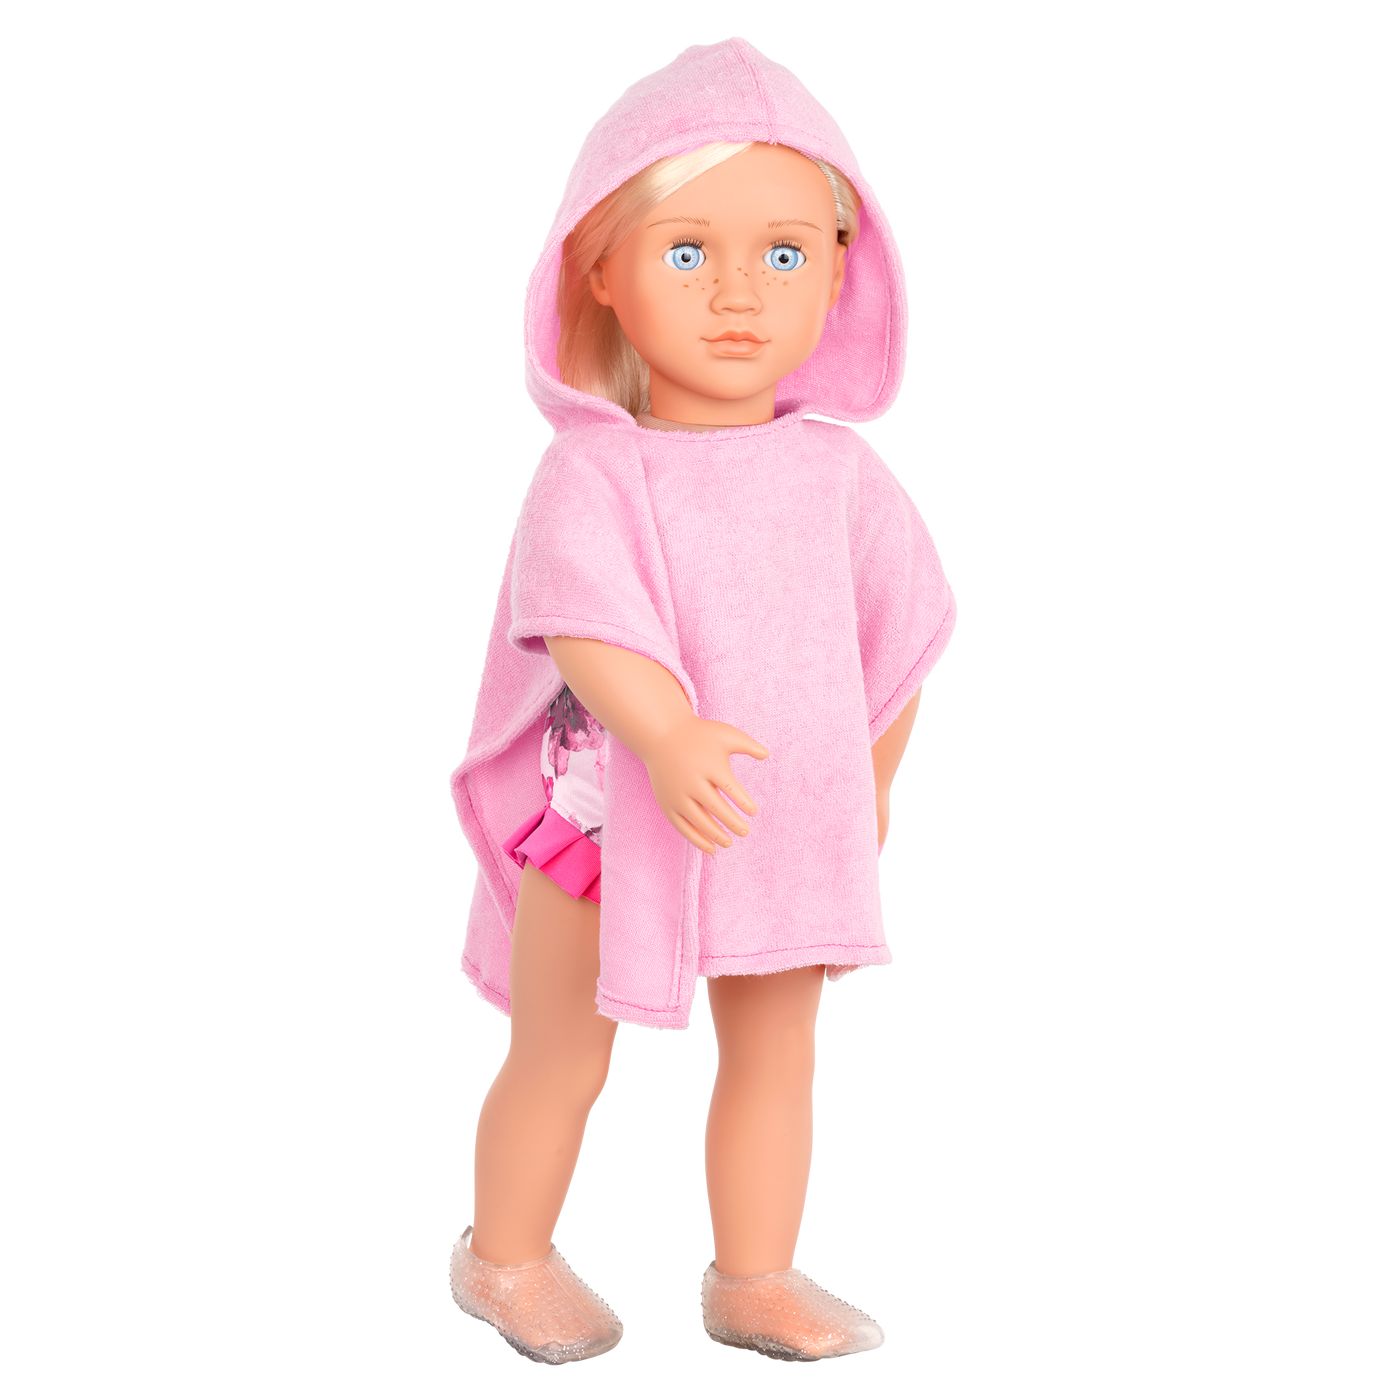 Seaside Blossom Swimsuit Outfit Hooded Towel for 18-inch Dolls